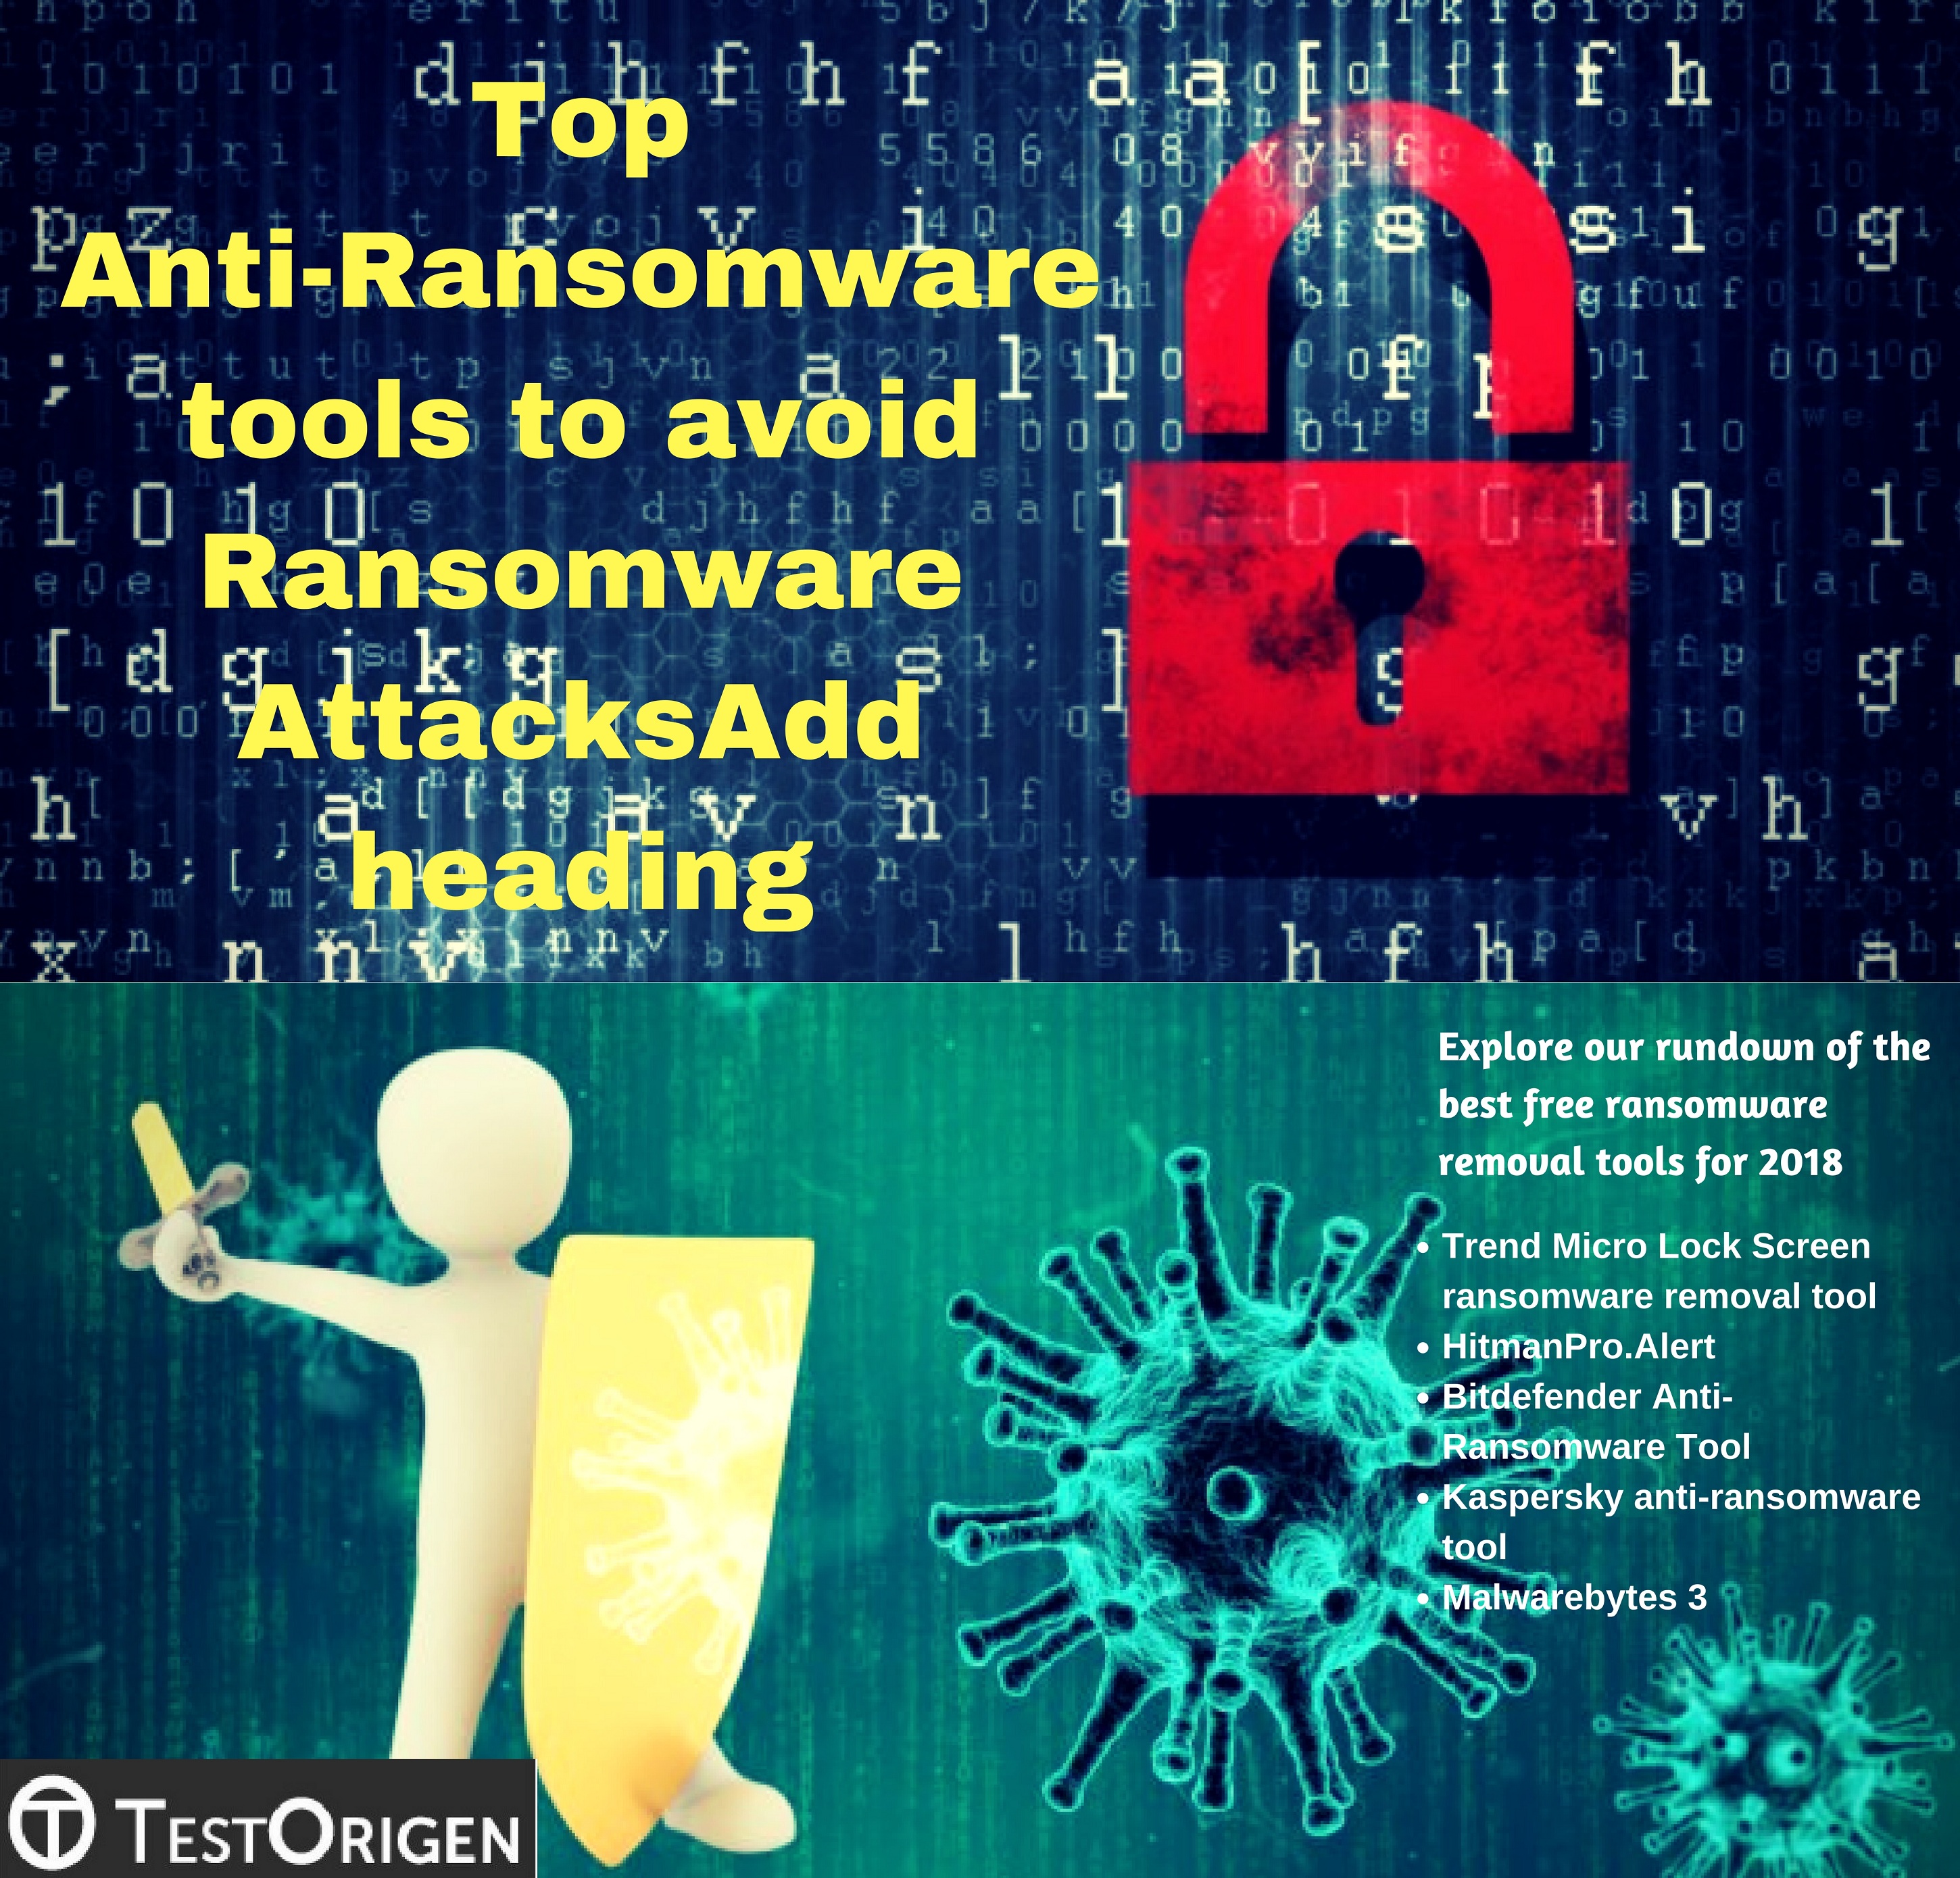 Top Anti-Ransomware tools to avoid Ransomware Attacks